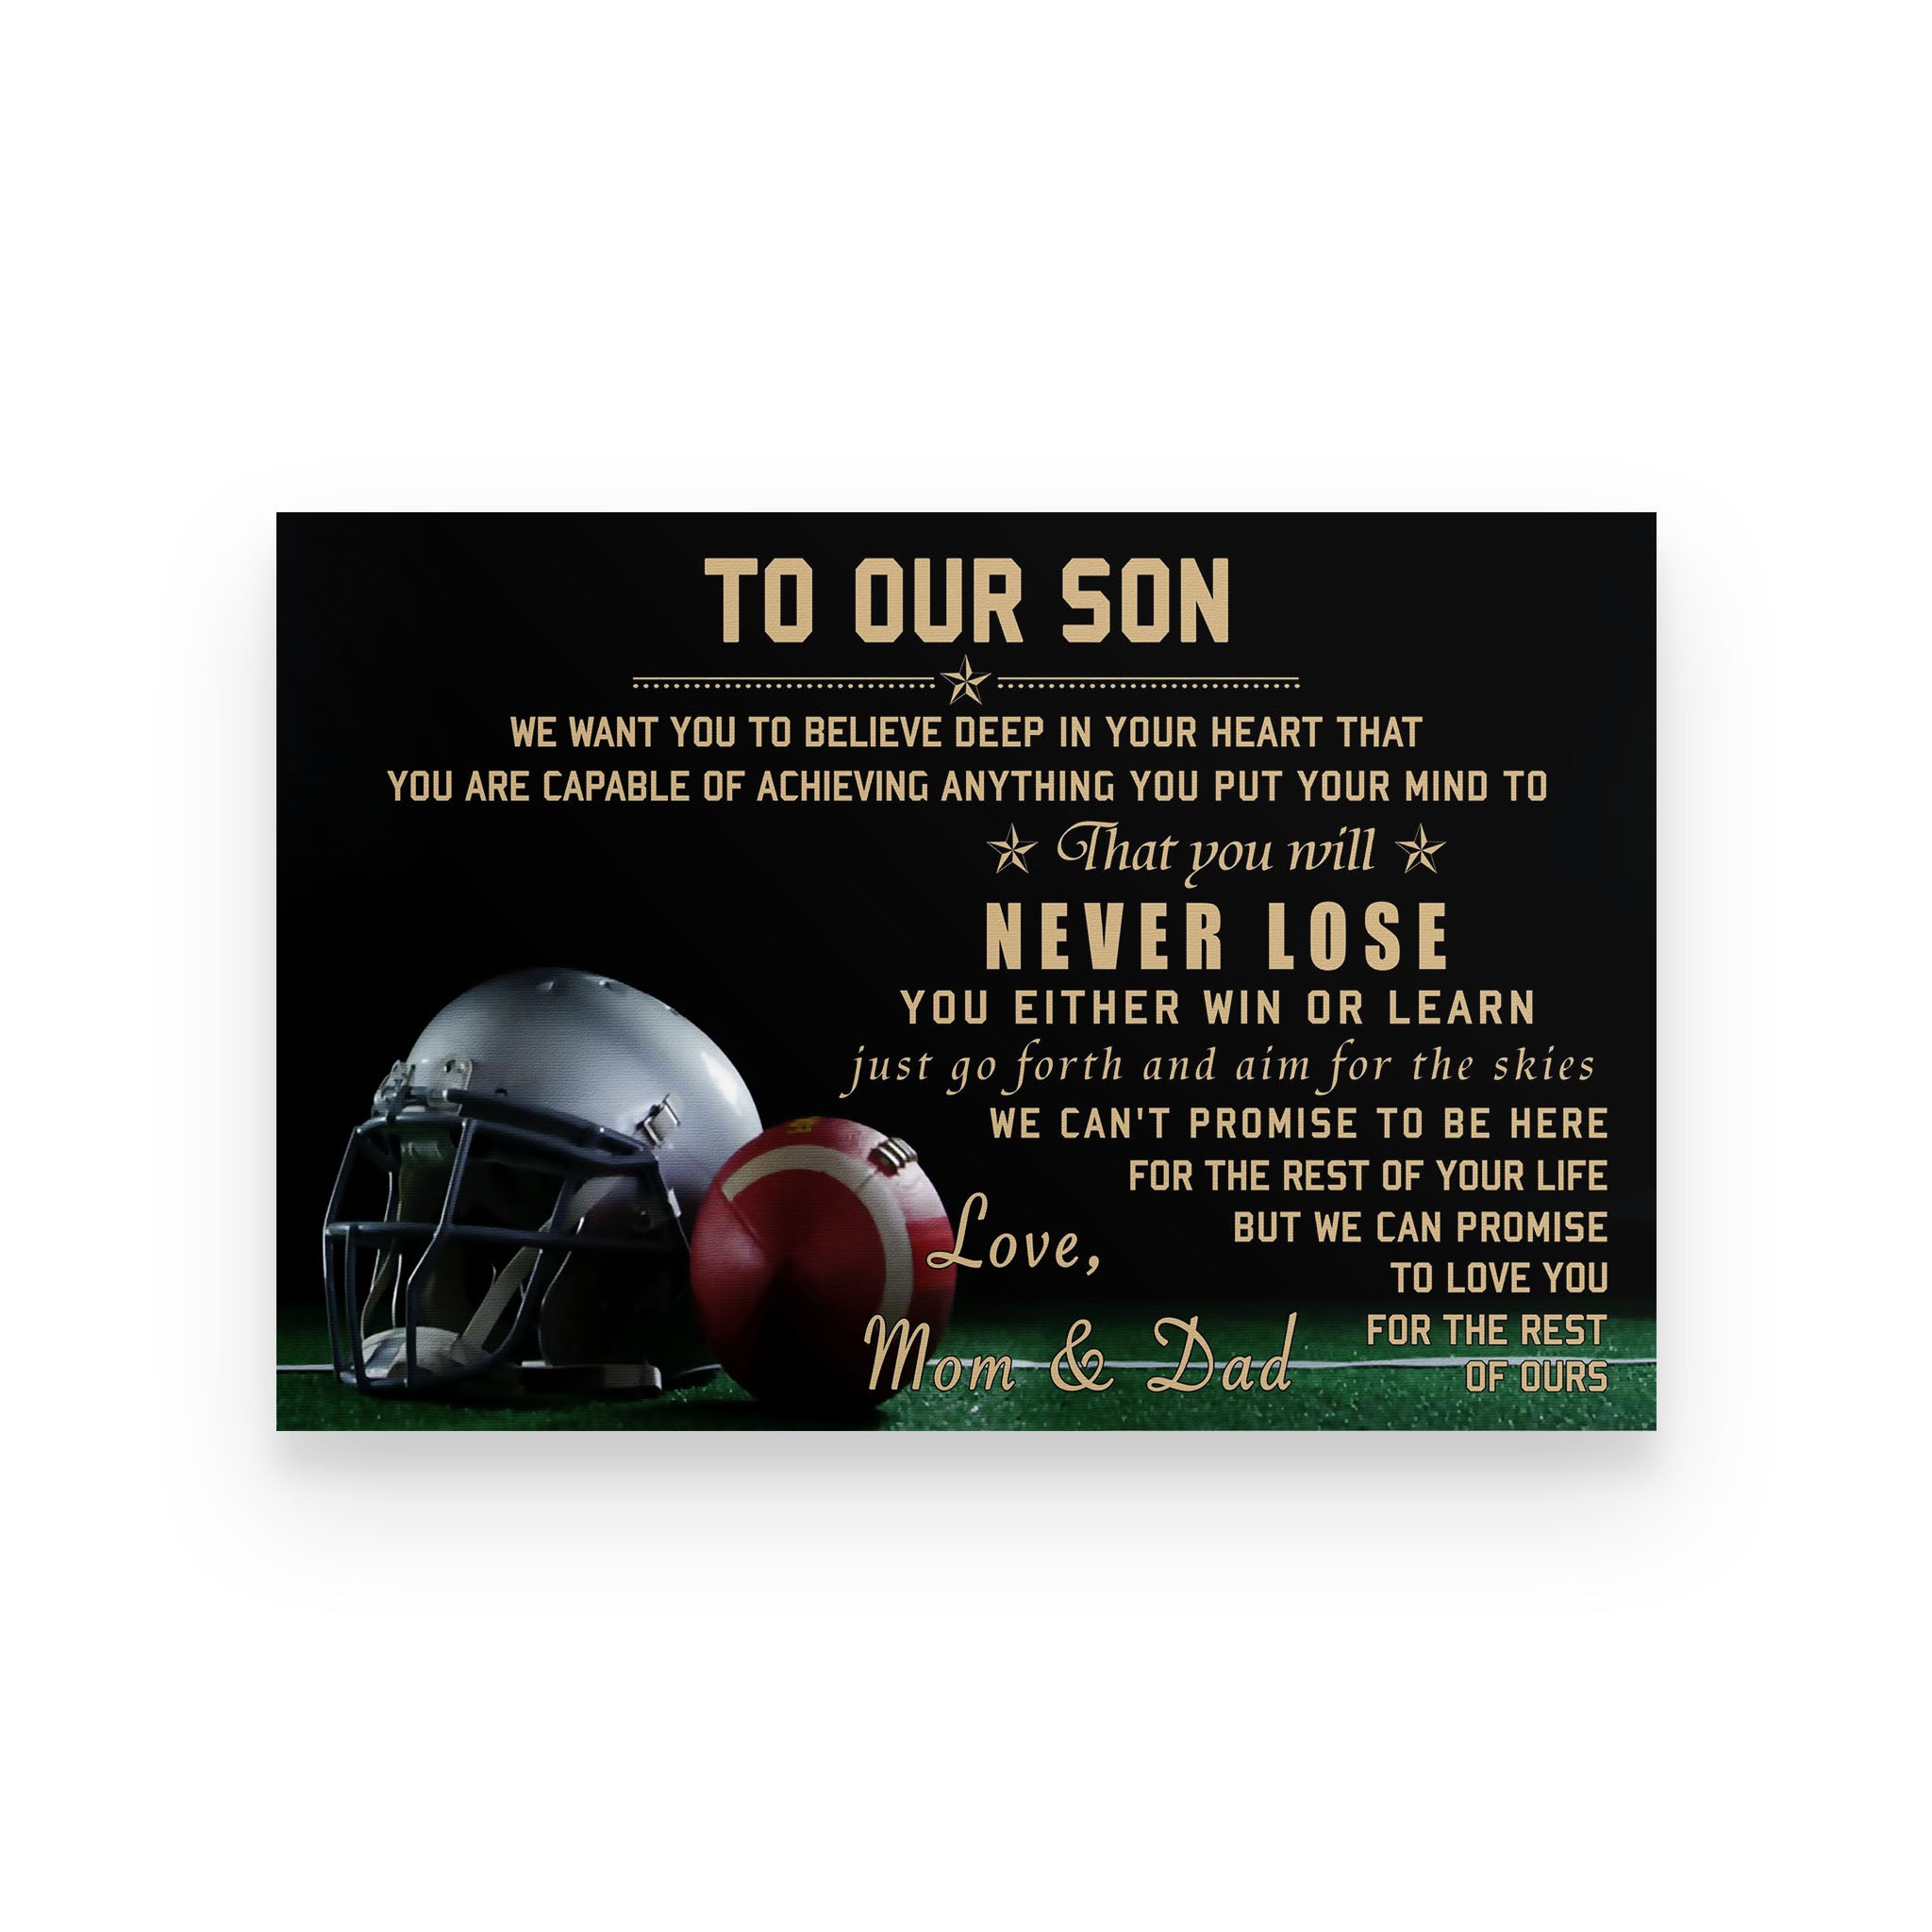 American football poster mom and dad to son we want you to believe deep in your heart vs2